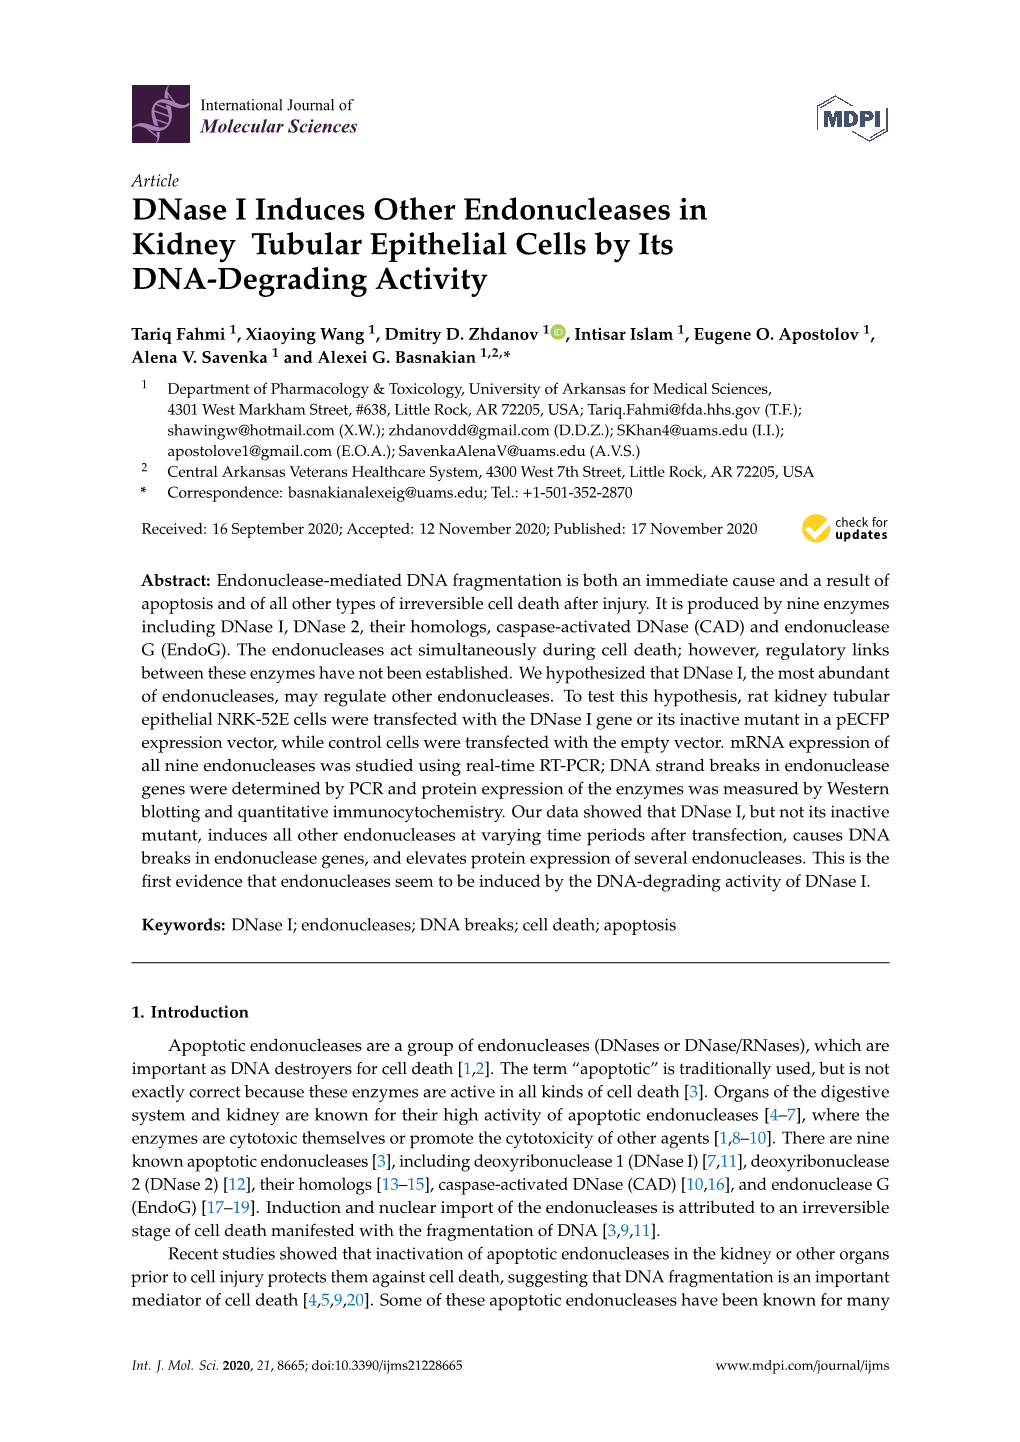 Dnase I Induces Other Endonucleases in Kidney Tubular Epithelial Cells by Its DNA-Degrading Activity